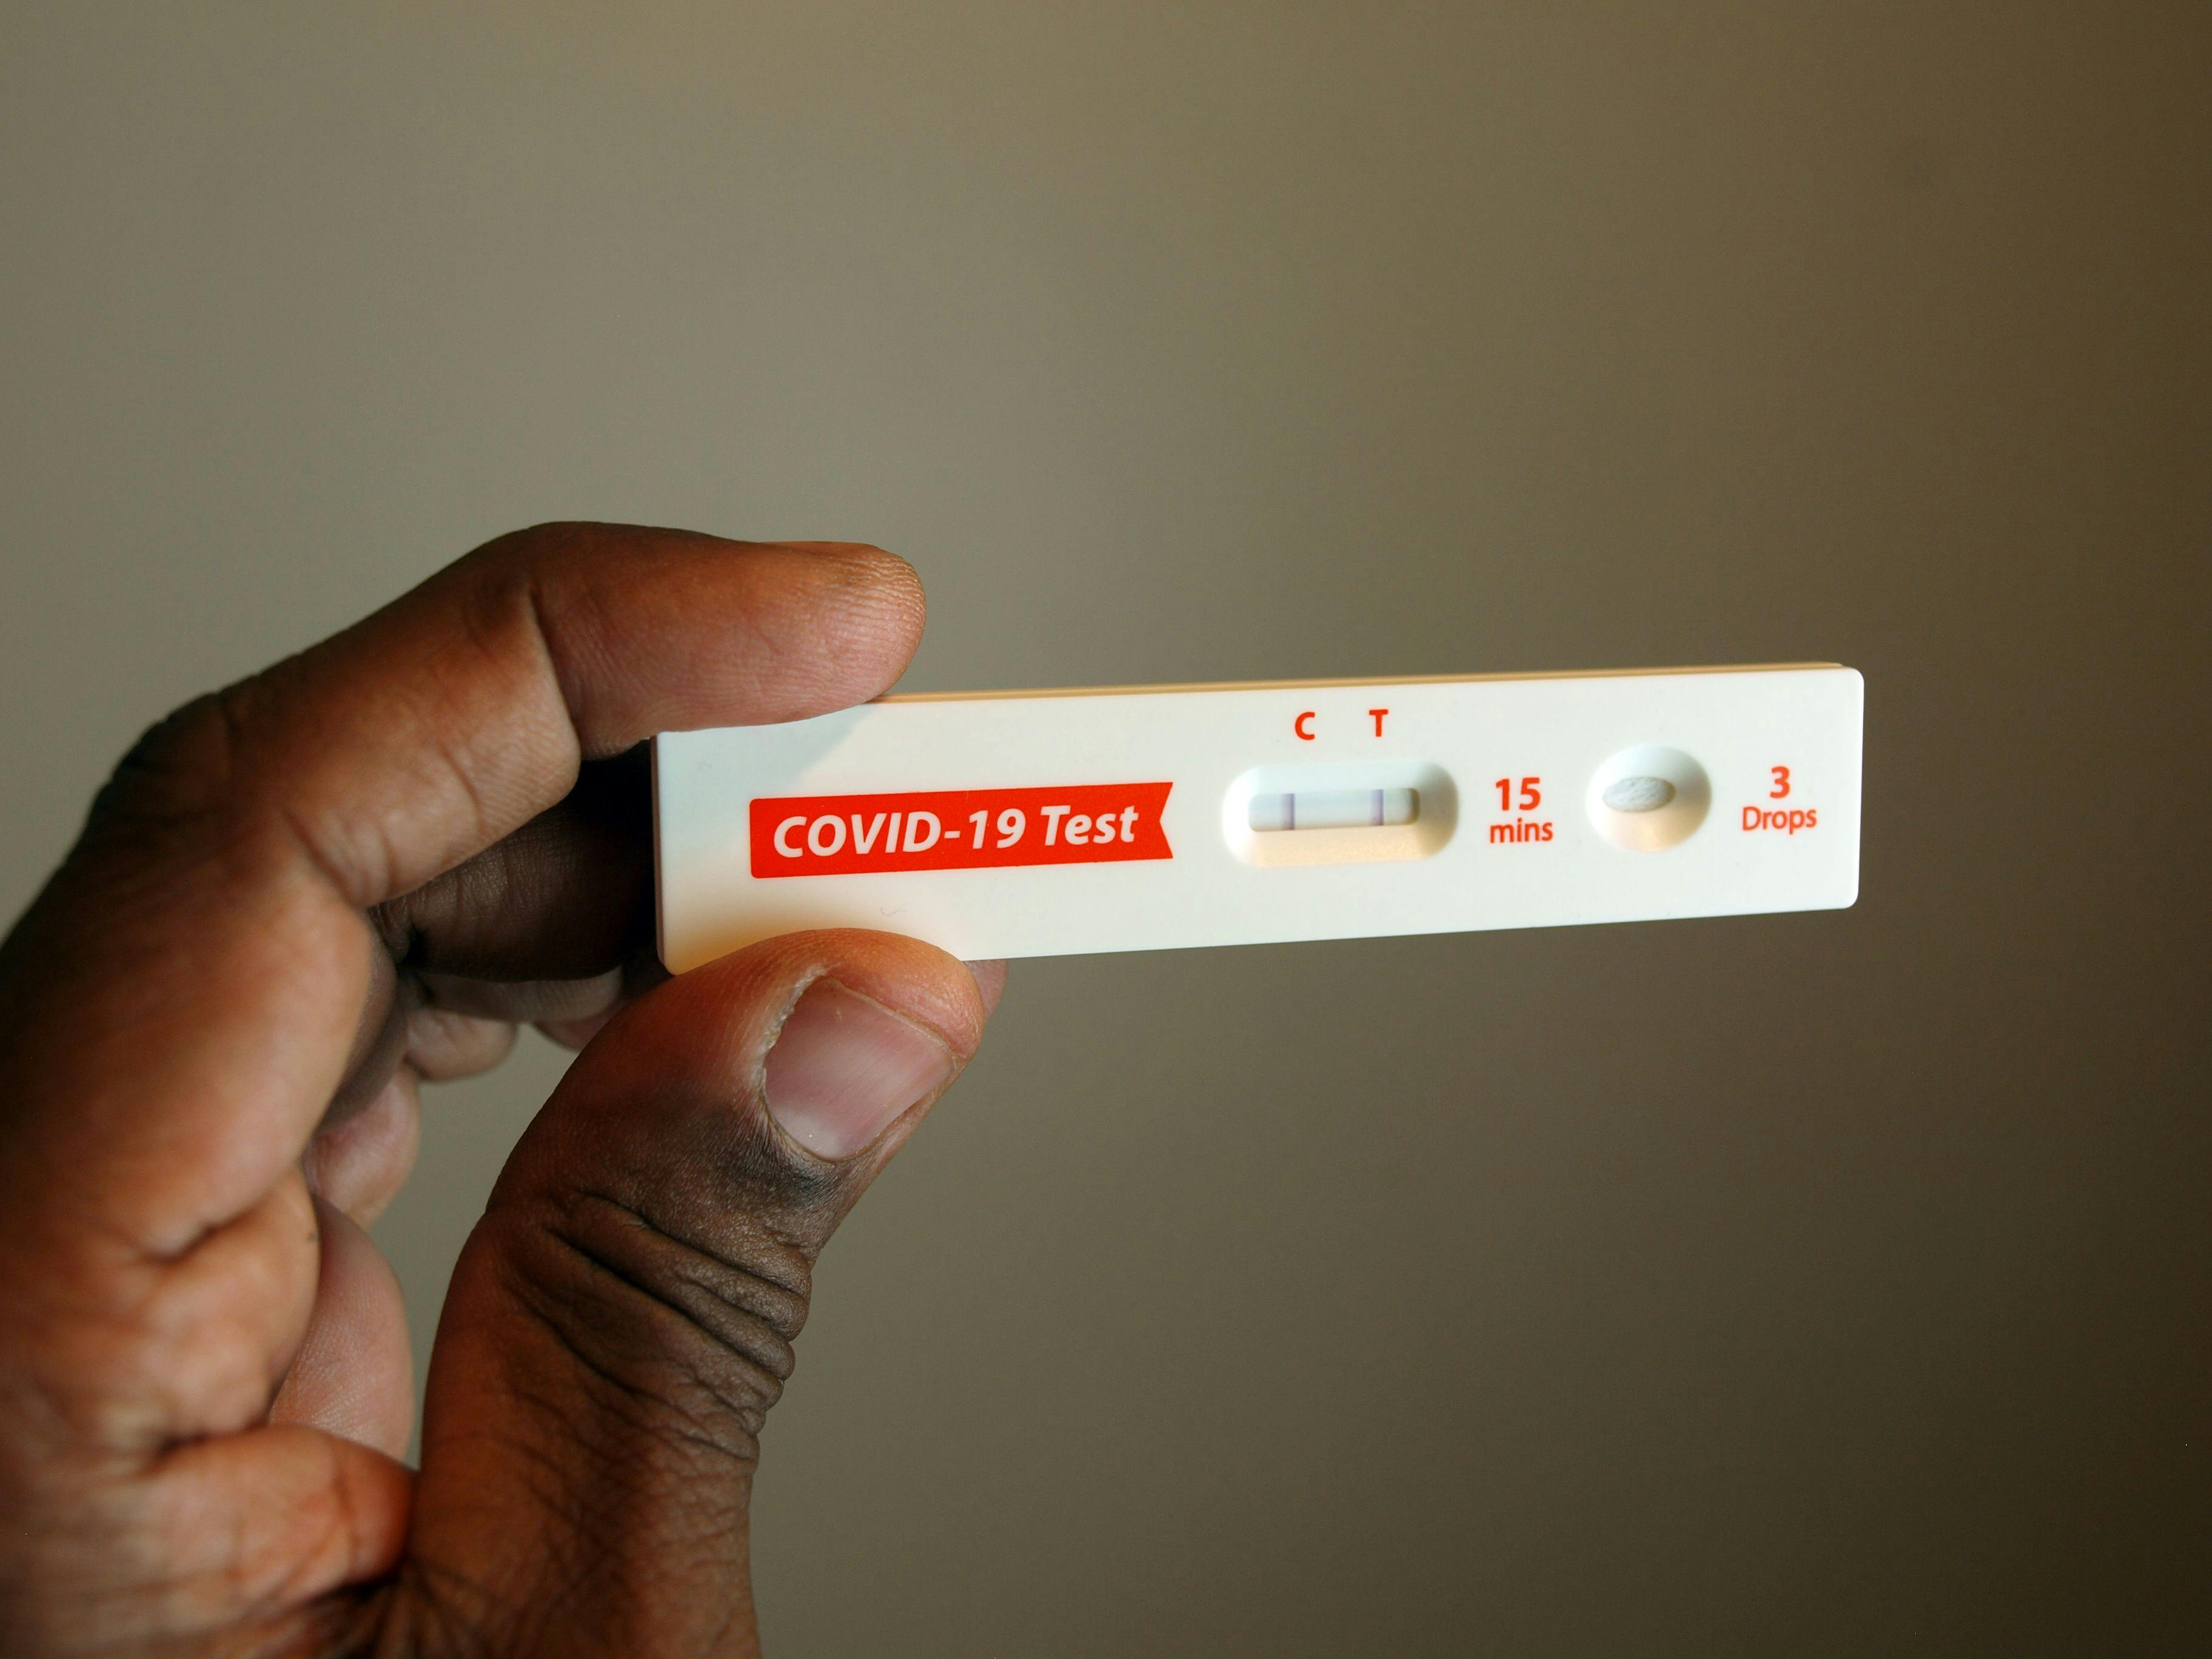 Positive COVID-19 rapid test -- Image credit: tdoes | stock.adobe.com